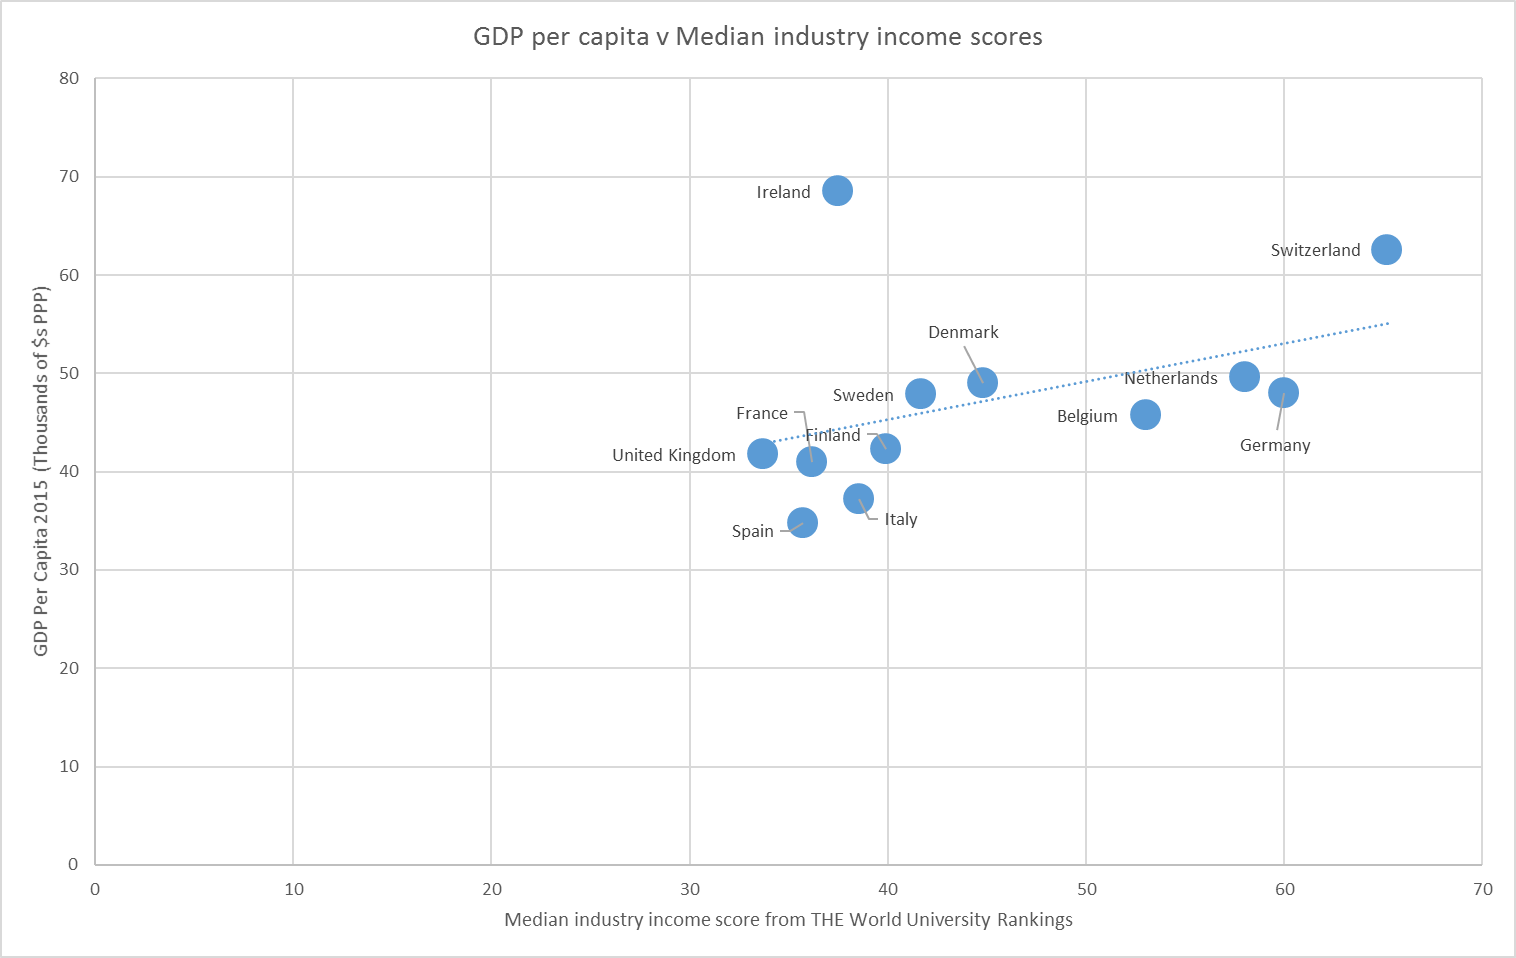 Median industry income scores compared with GDP per capita